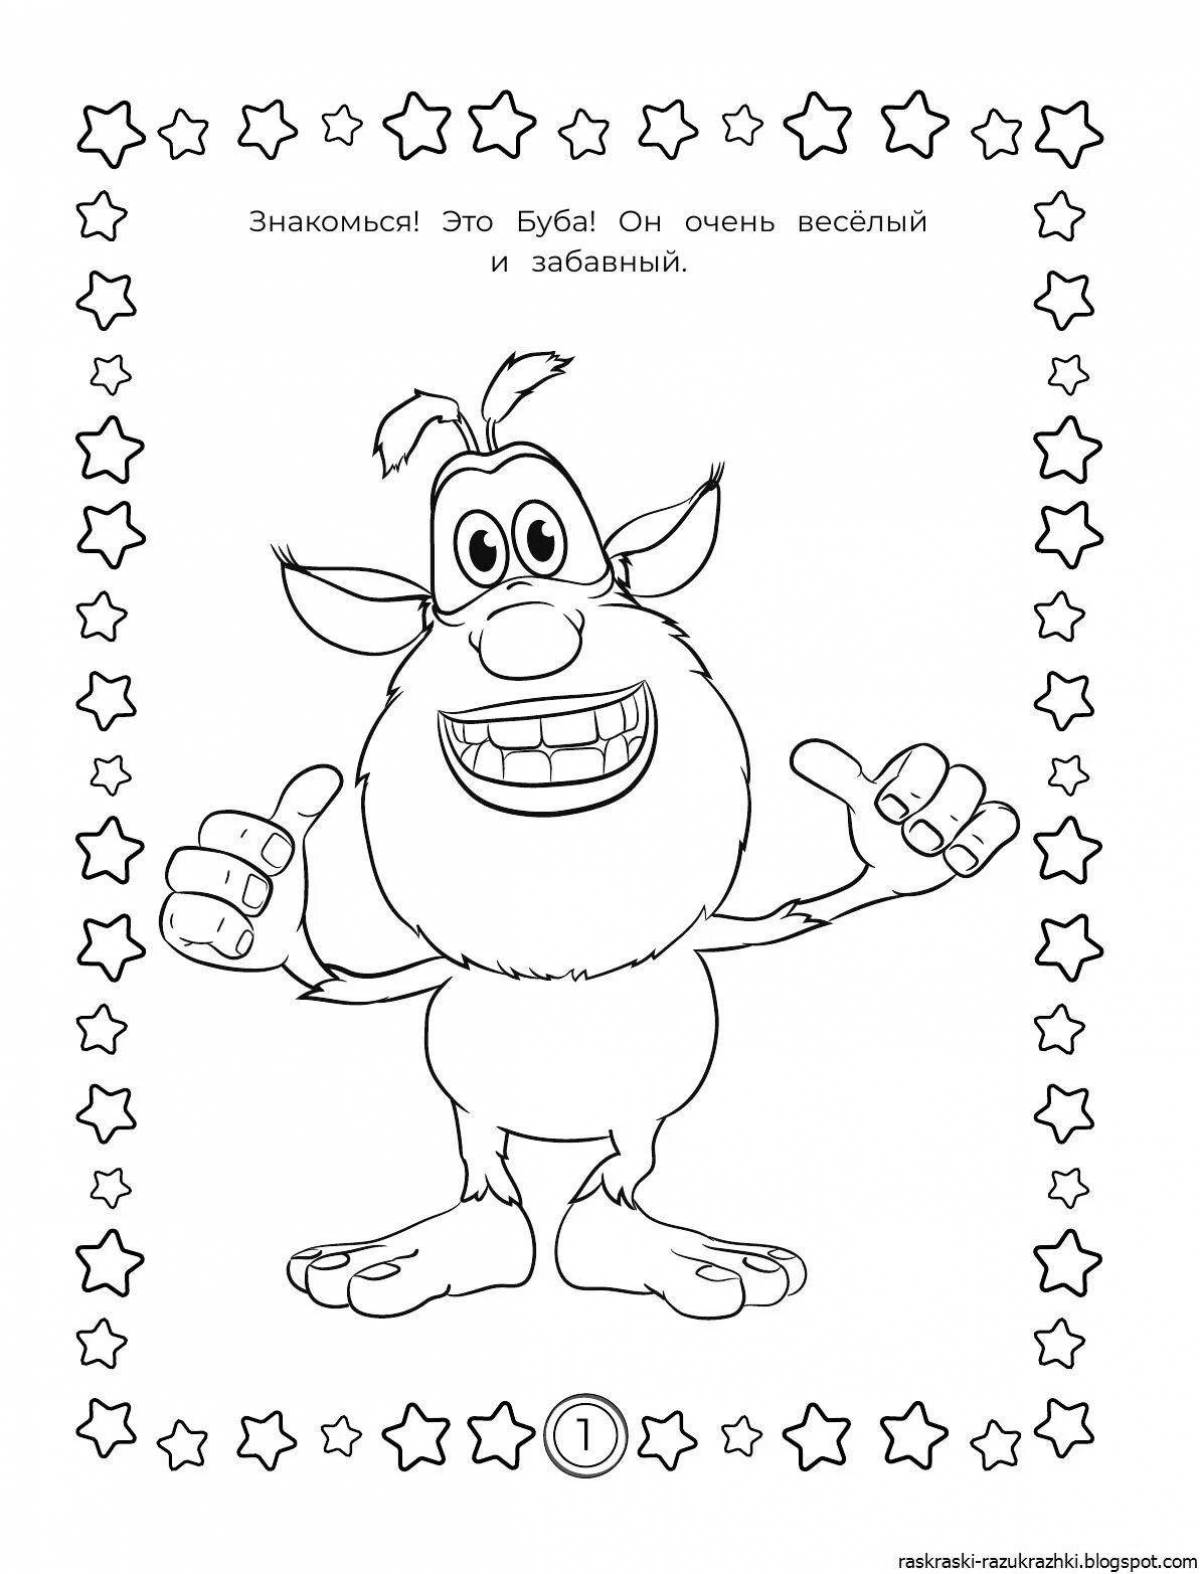 Charming buba coloring book for kids